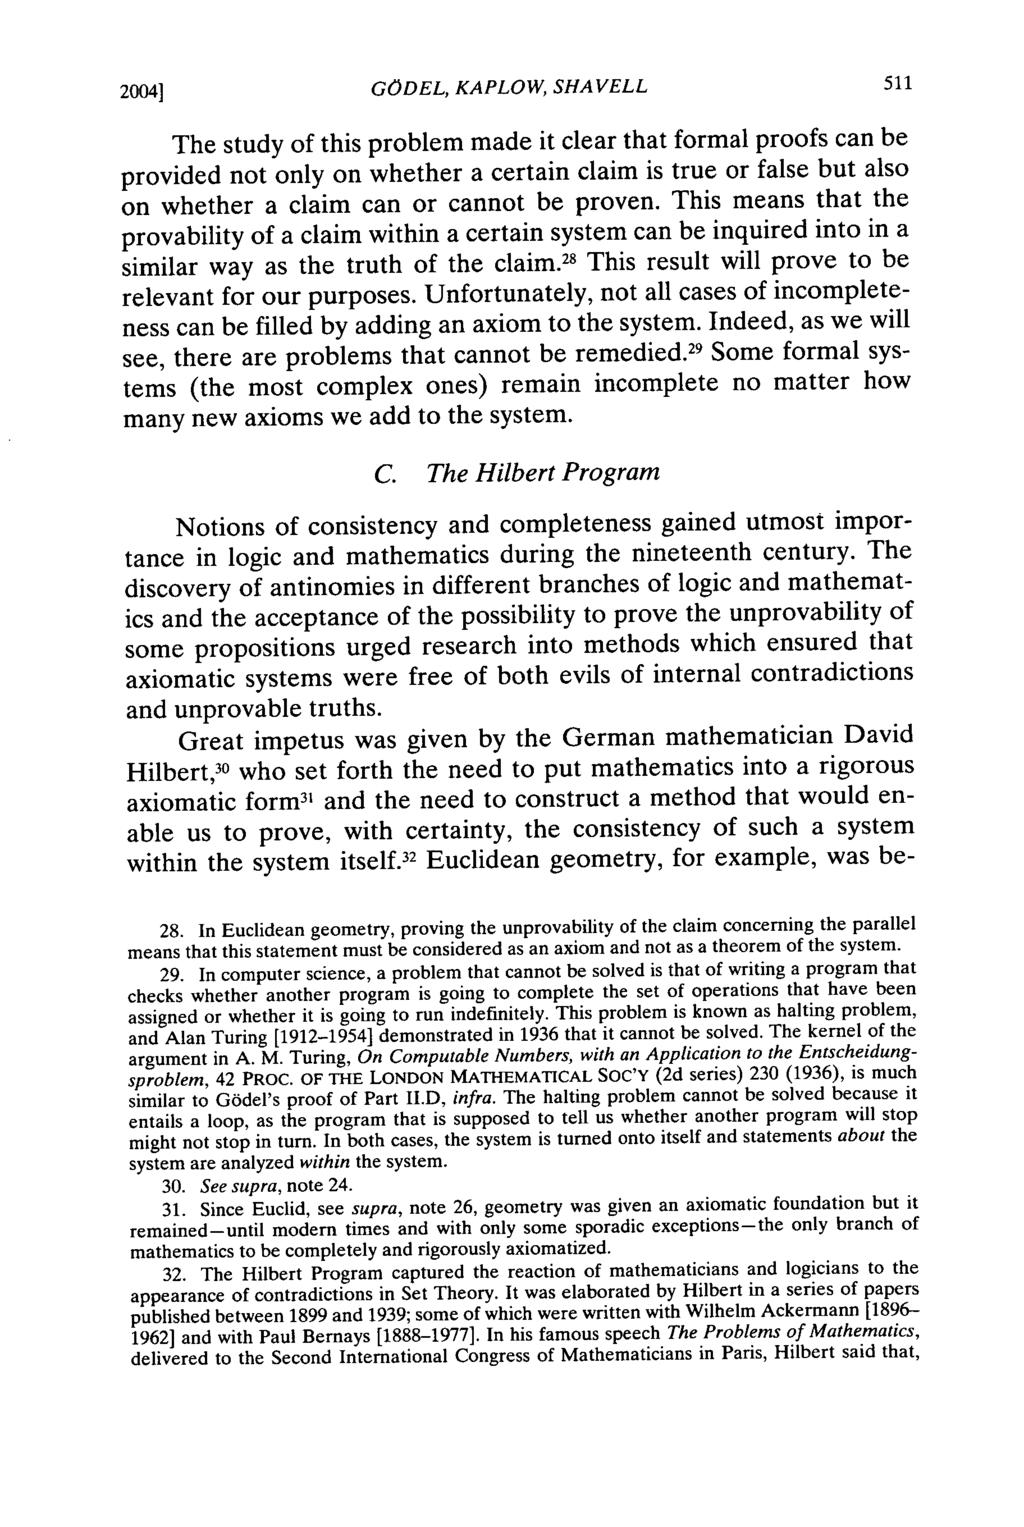 20041 GODEL, KAPLOW, SHAVELL The study of this problem made it clear that formal proofs can be provided not only on whether a certain claim is true or false but also on whether a claim can or cannot